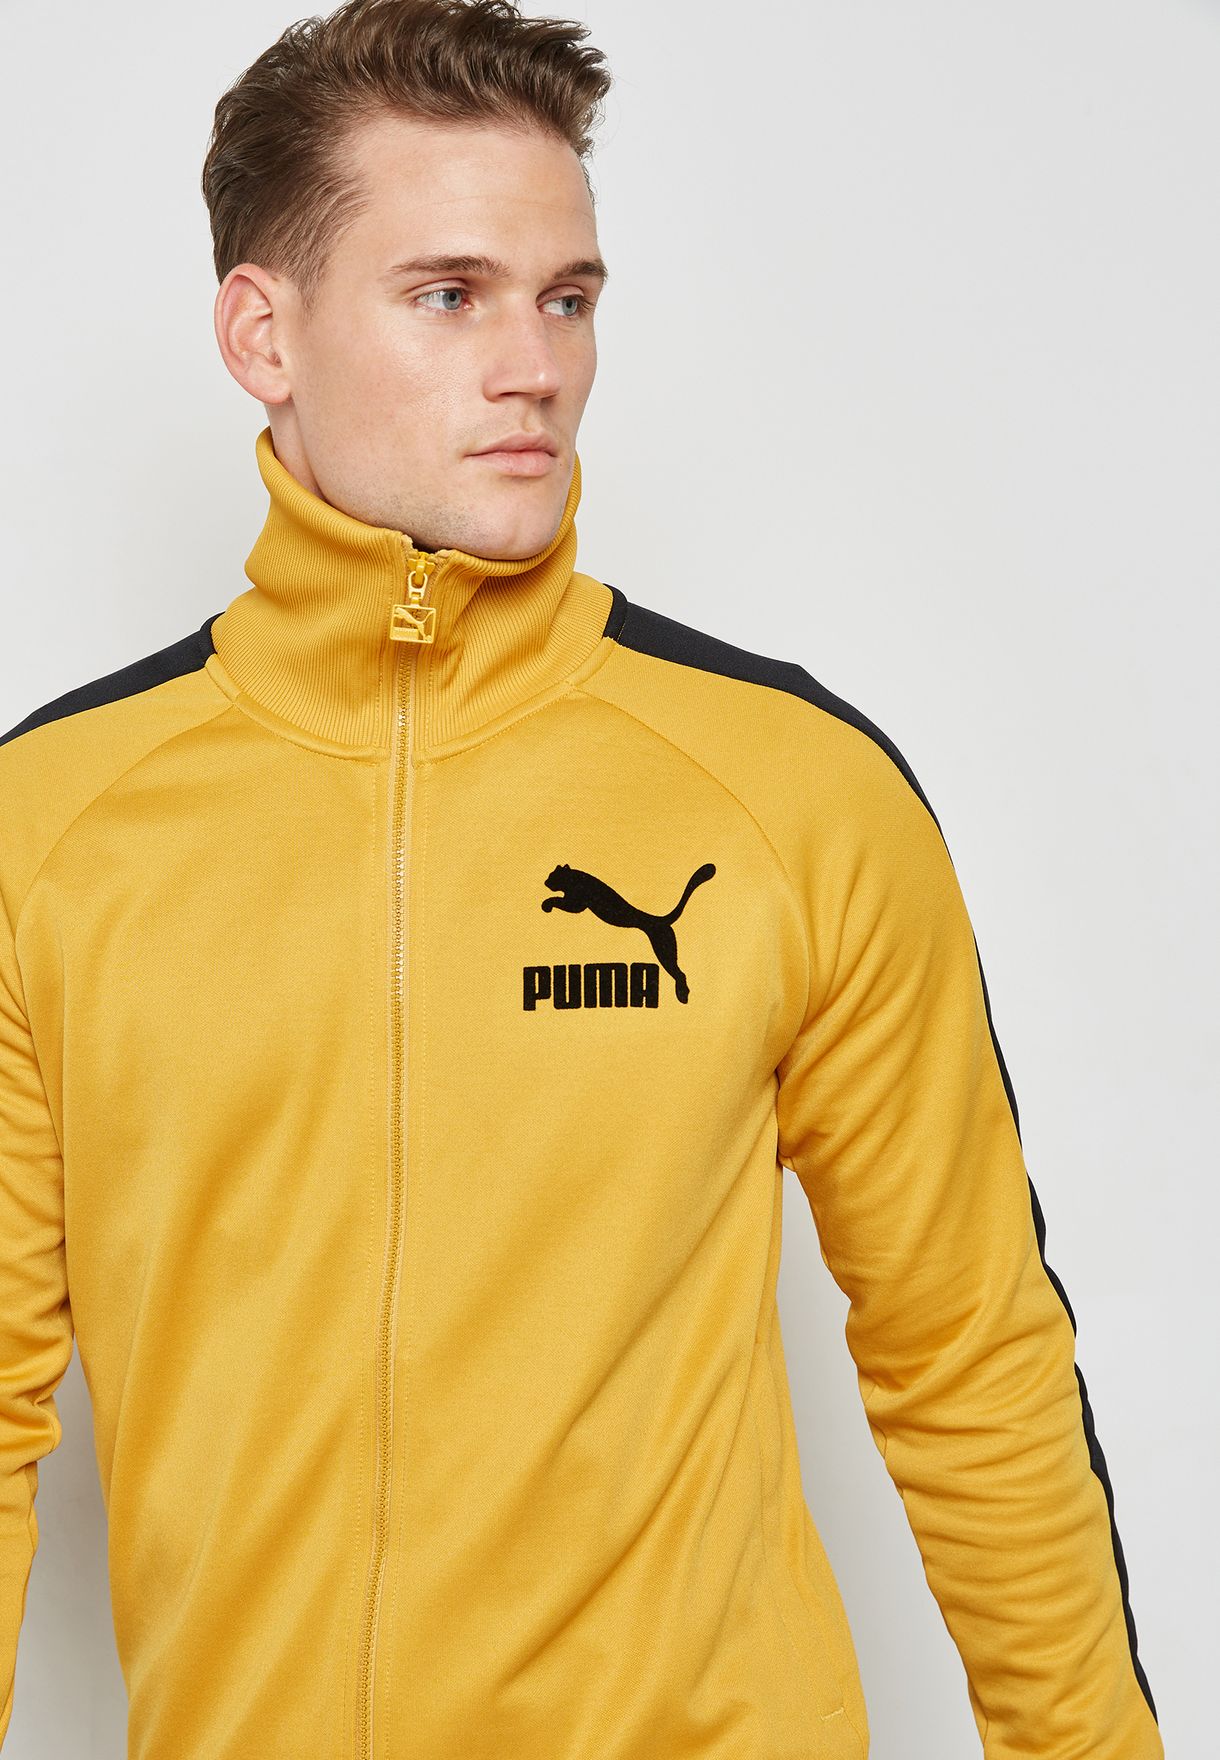 Puma Yellow Track Jacket | vlr.eng.br